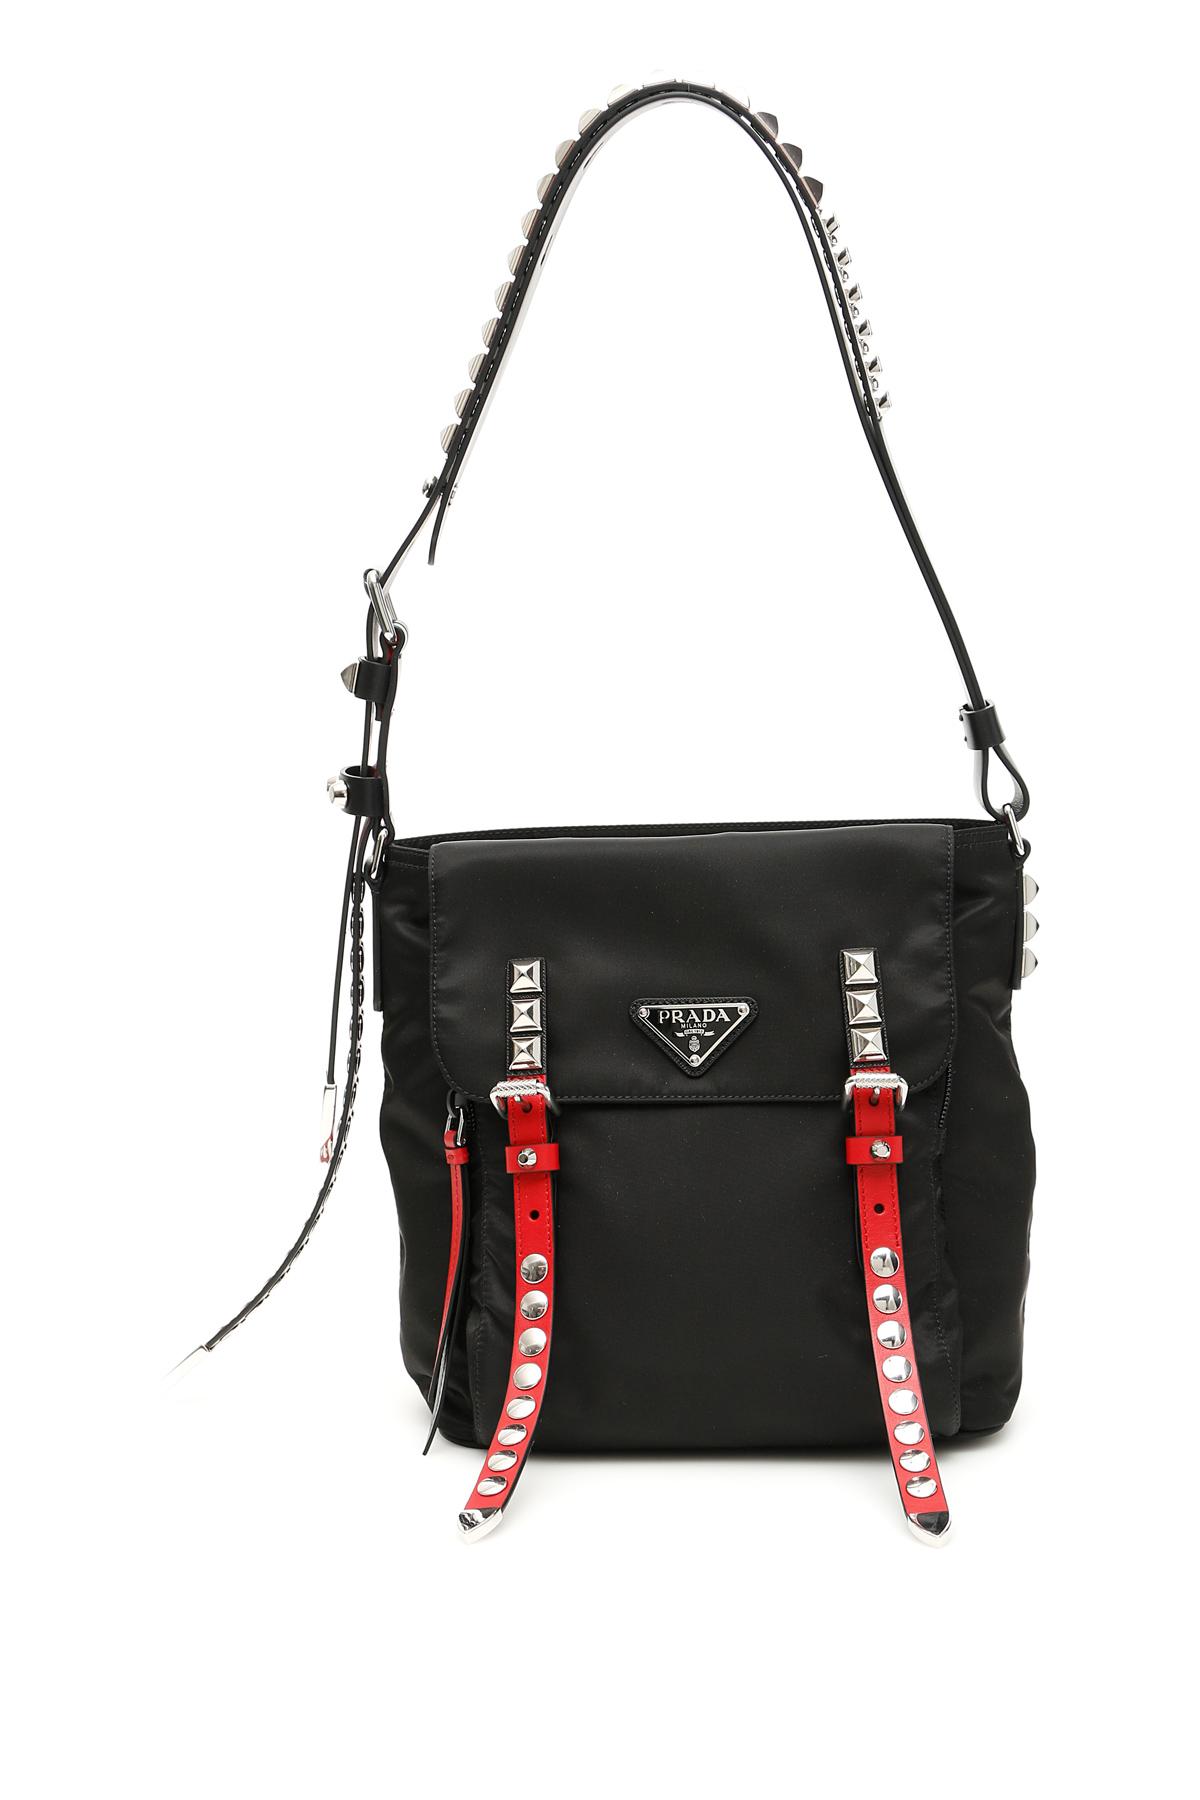 Prada Synthetic Nylon Bucket Bag With Studs in White - Lyst